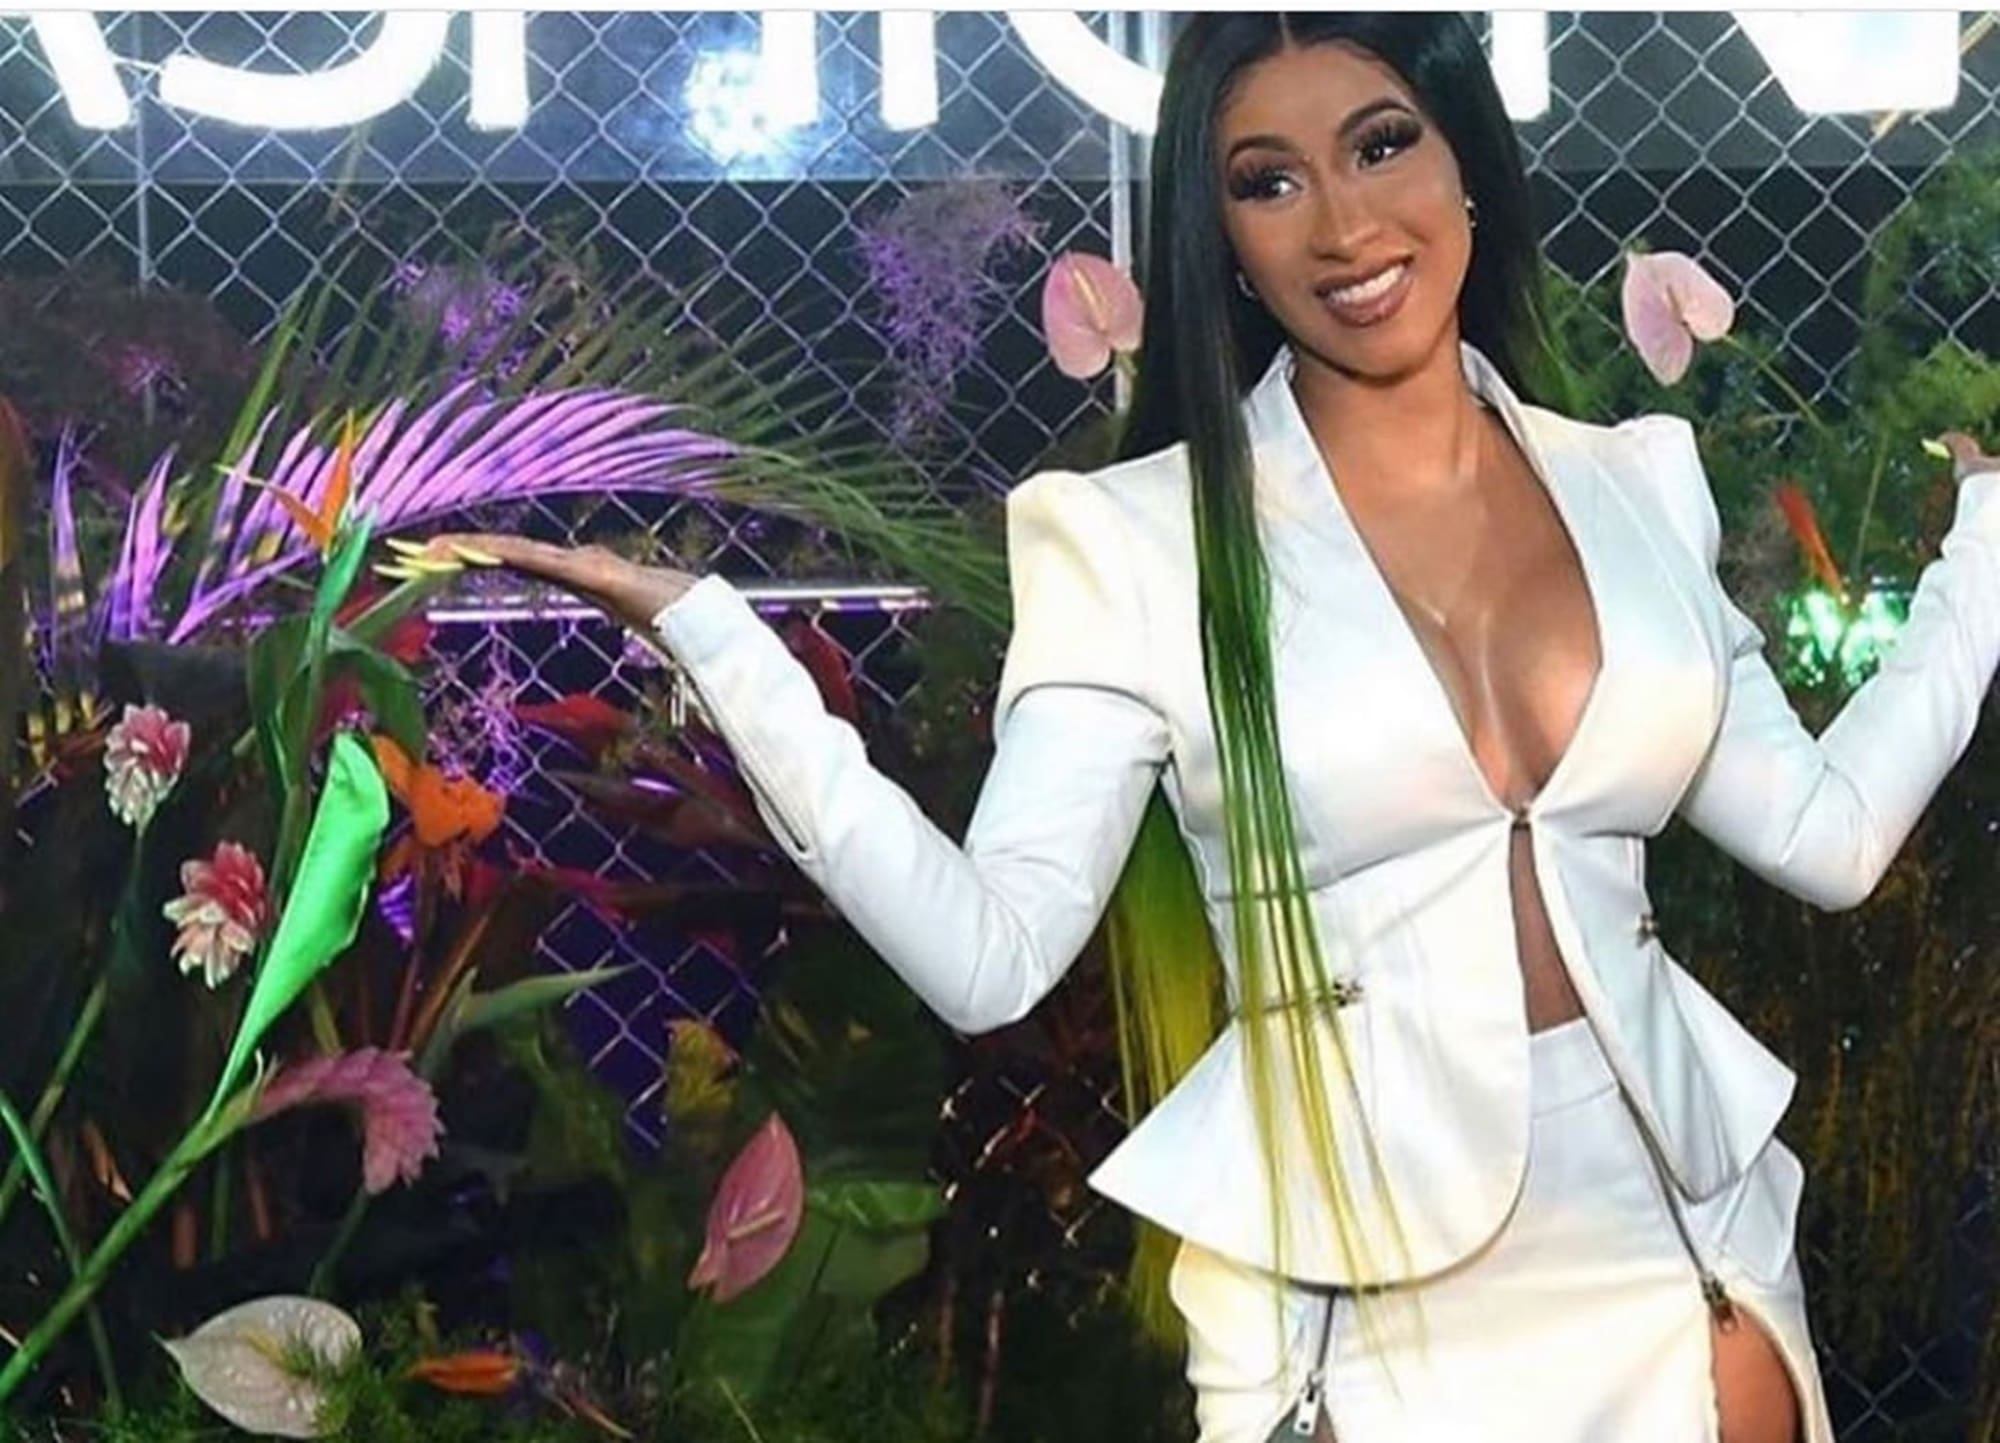 ”cardi-b-gets-slammed-by-fans-over-press-single-as-she-uses-alluring-pictures-to-promote-it-see-why-some-think-offsets-wifes-music-is-losing-its-edge-and-has-become-too-generic”